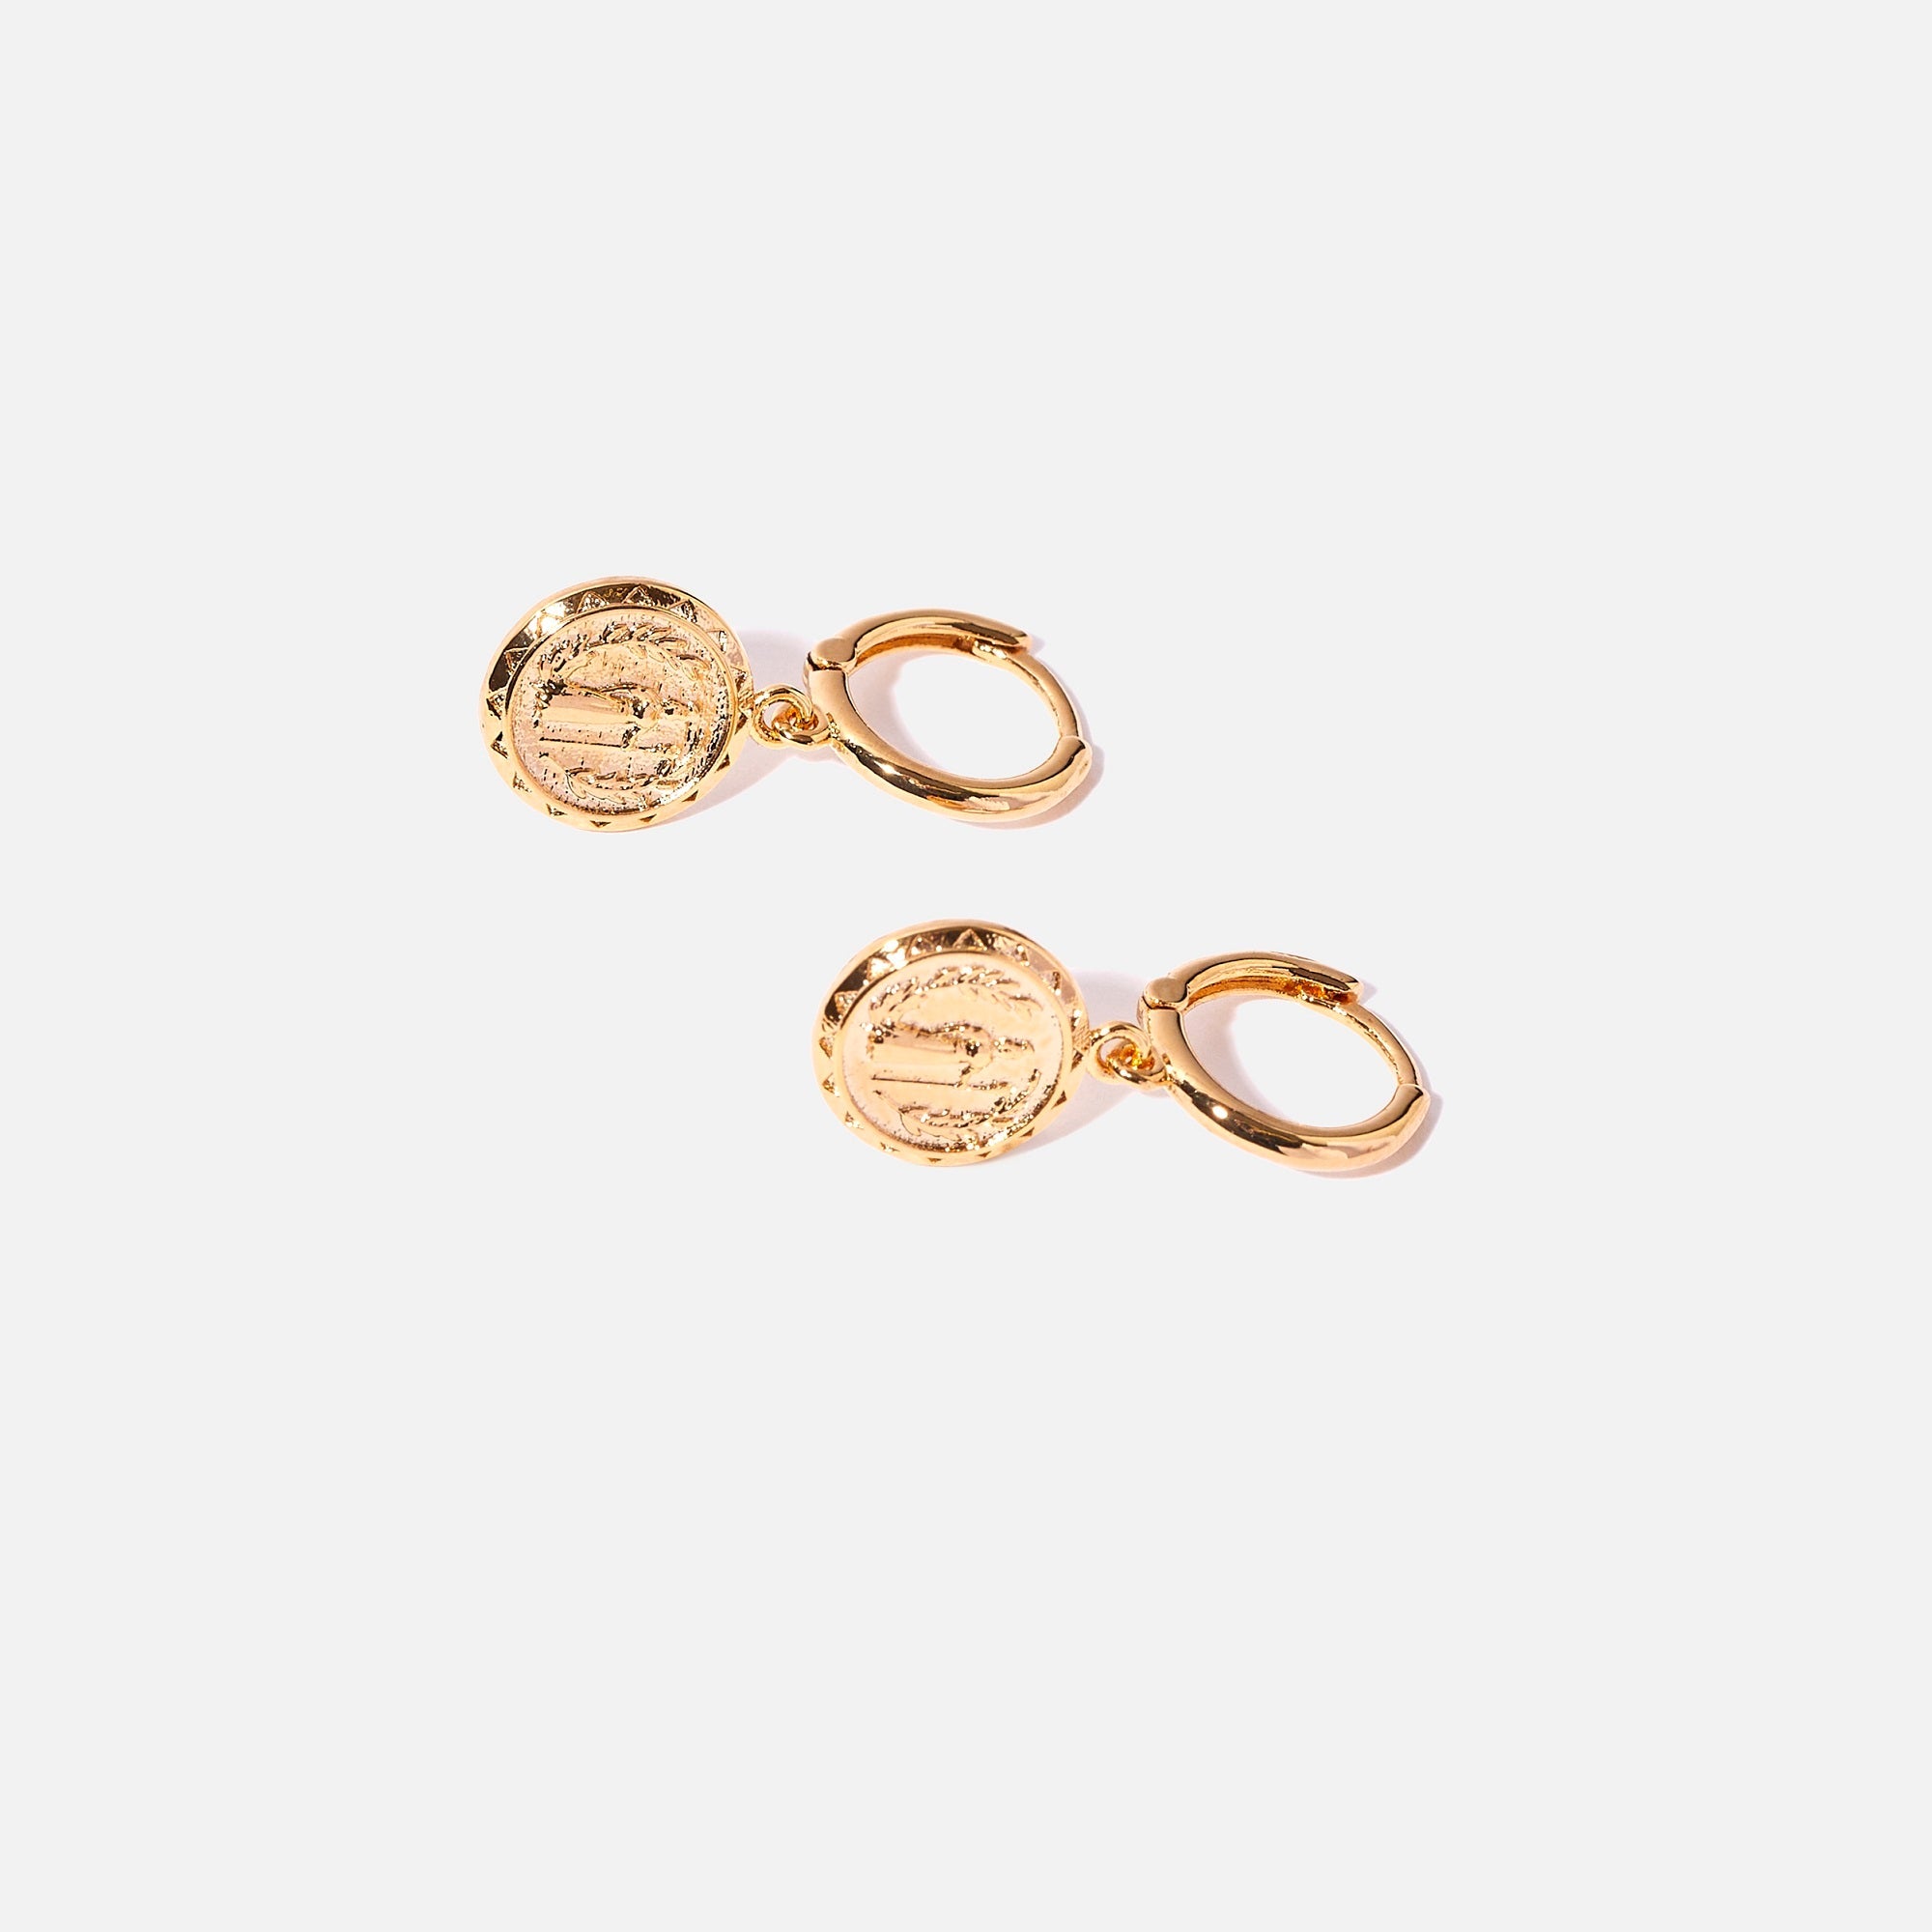 Buy Coin Hoops Gold Coin Hoops Small Coin Earrings Tiny Coin Online in  India  Etsy